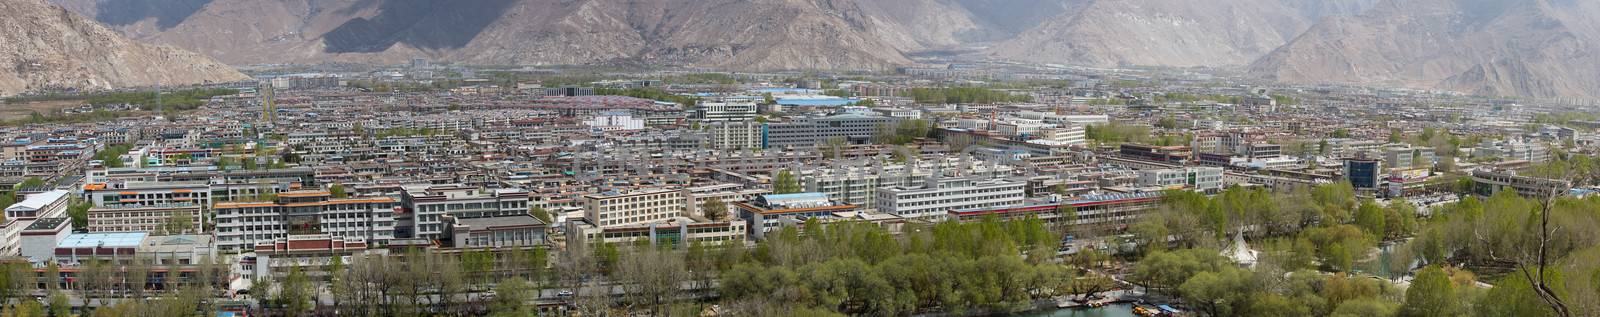 Panorama of the new city of Lhasa, Tibet by watchtheworld